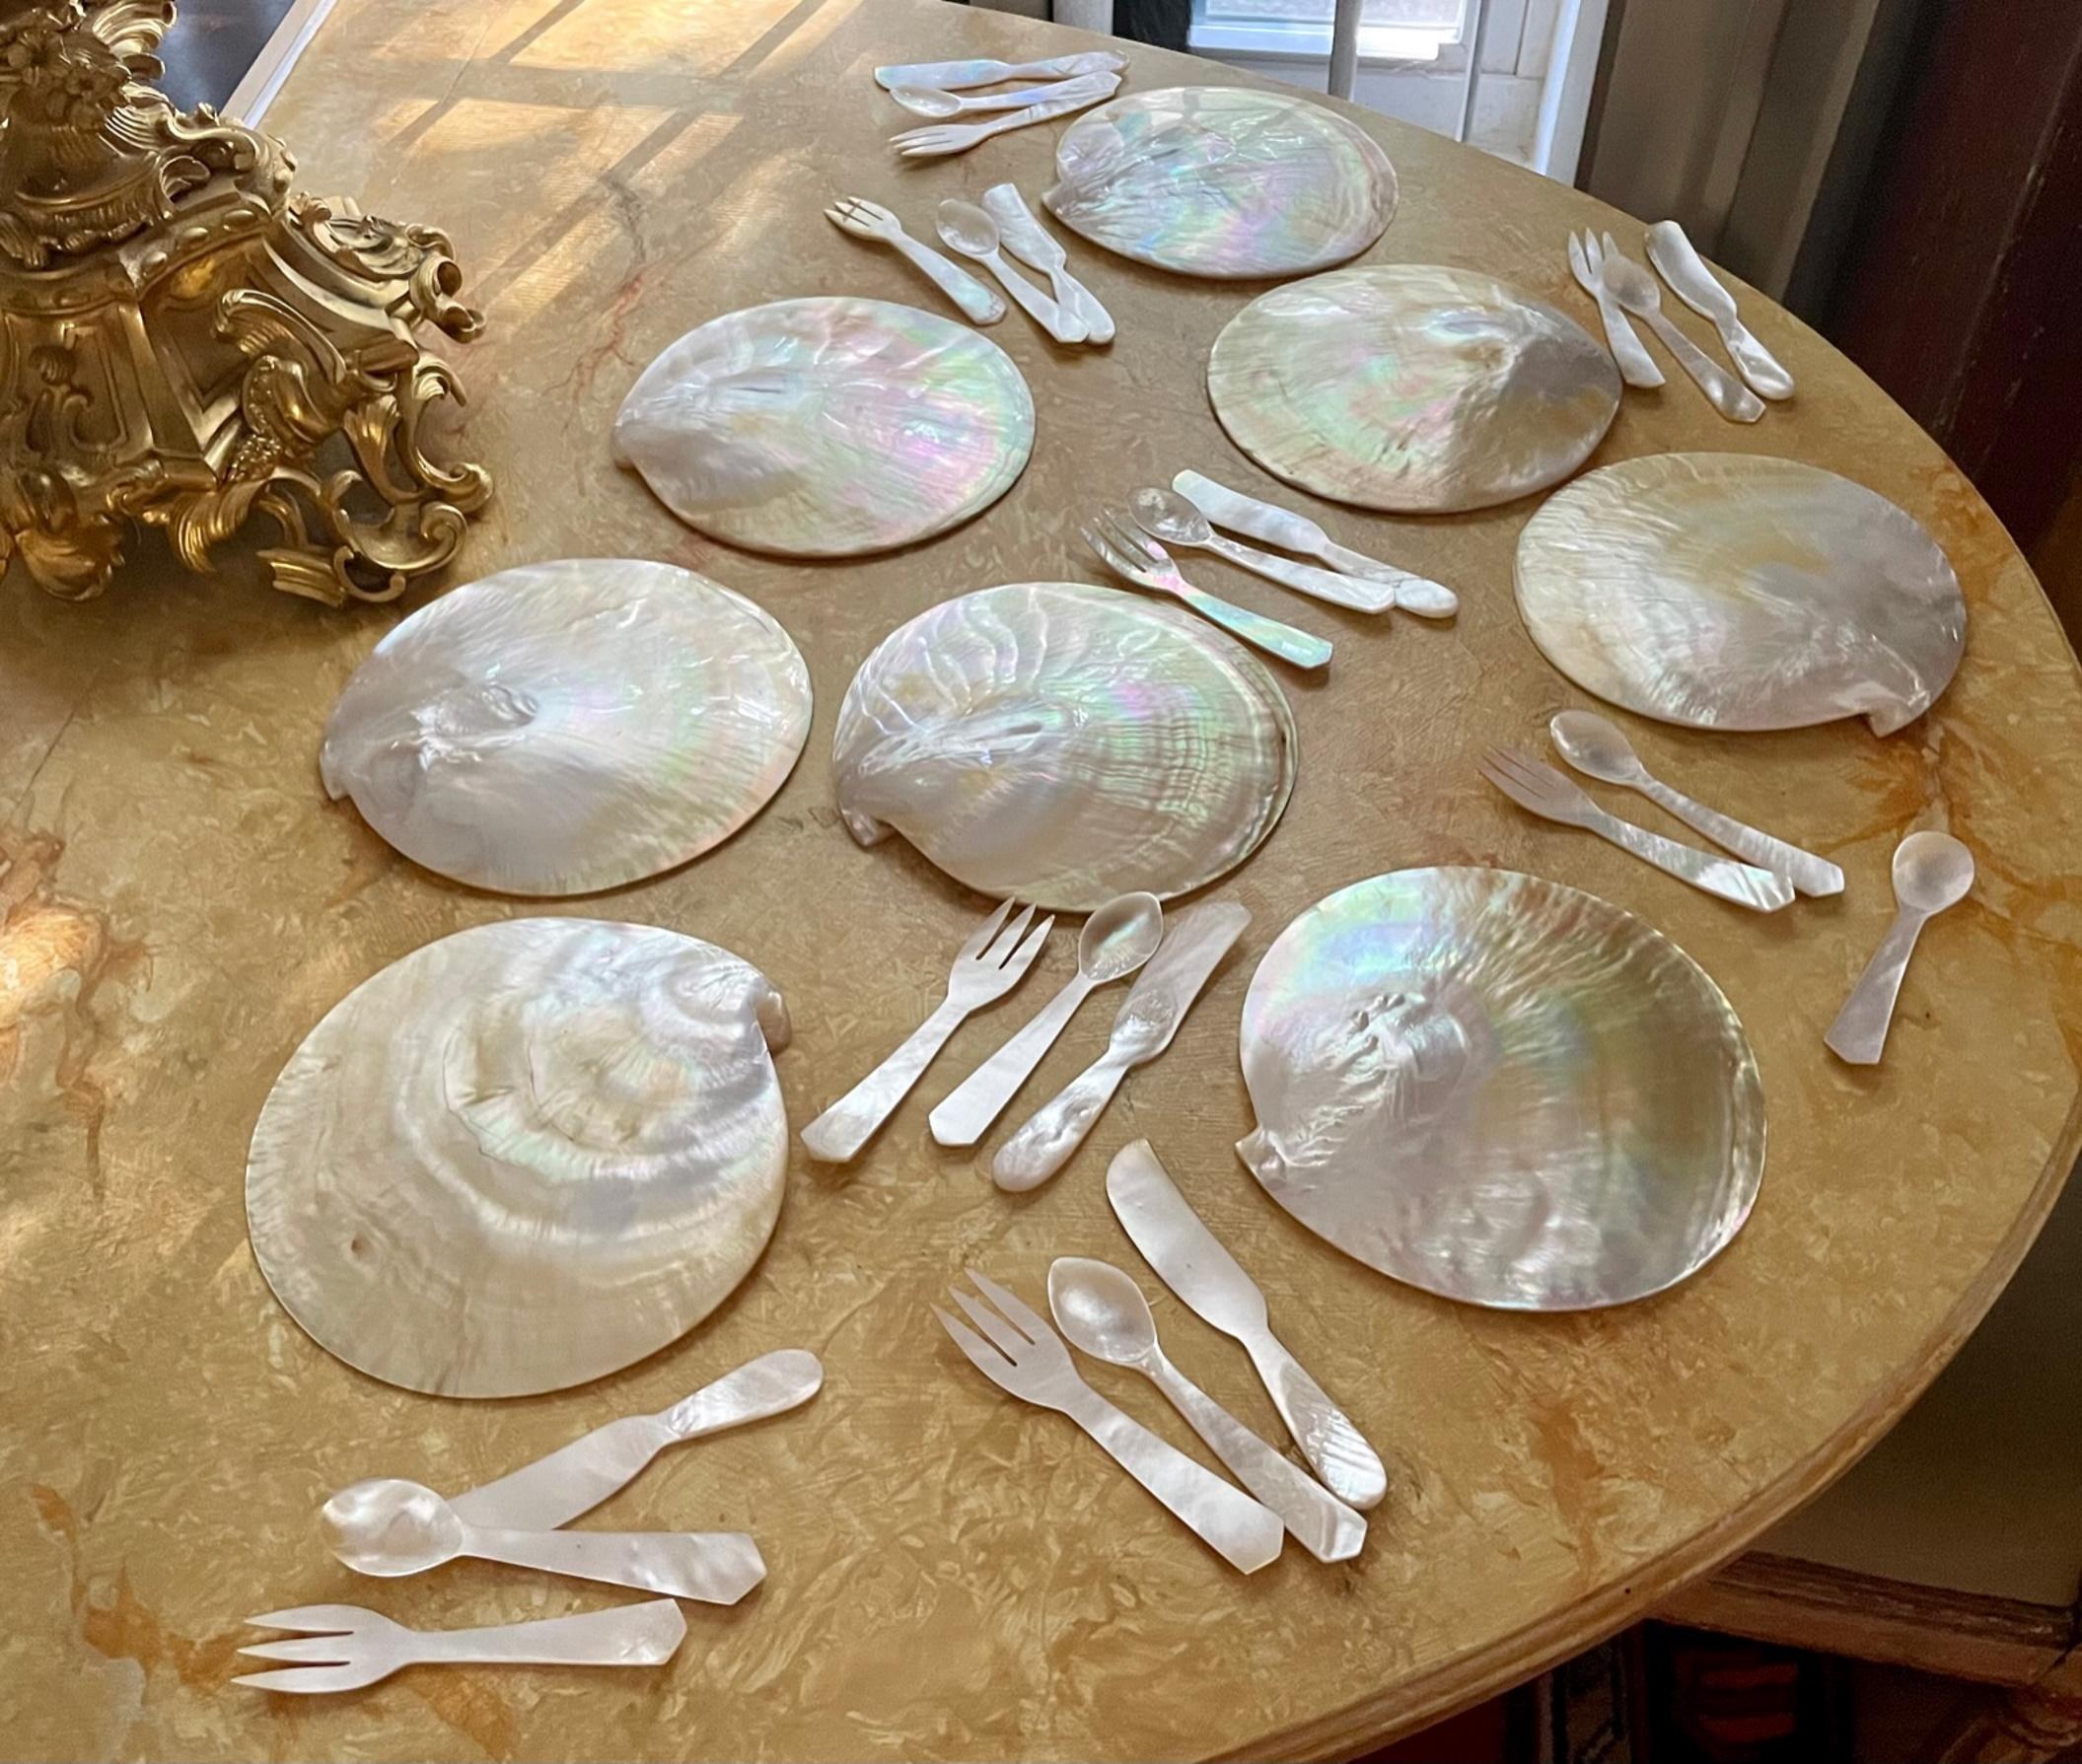 Carved Mother of Pearl Seashell Caviar Dish with Cutlery, 8 Complete Sets